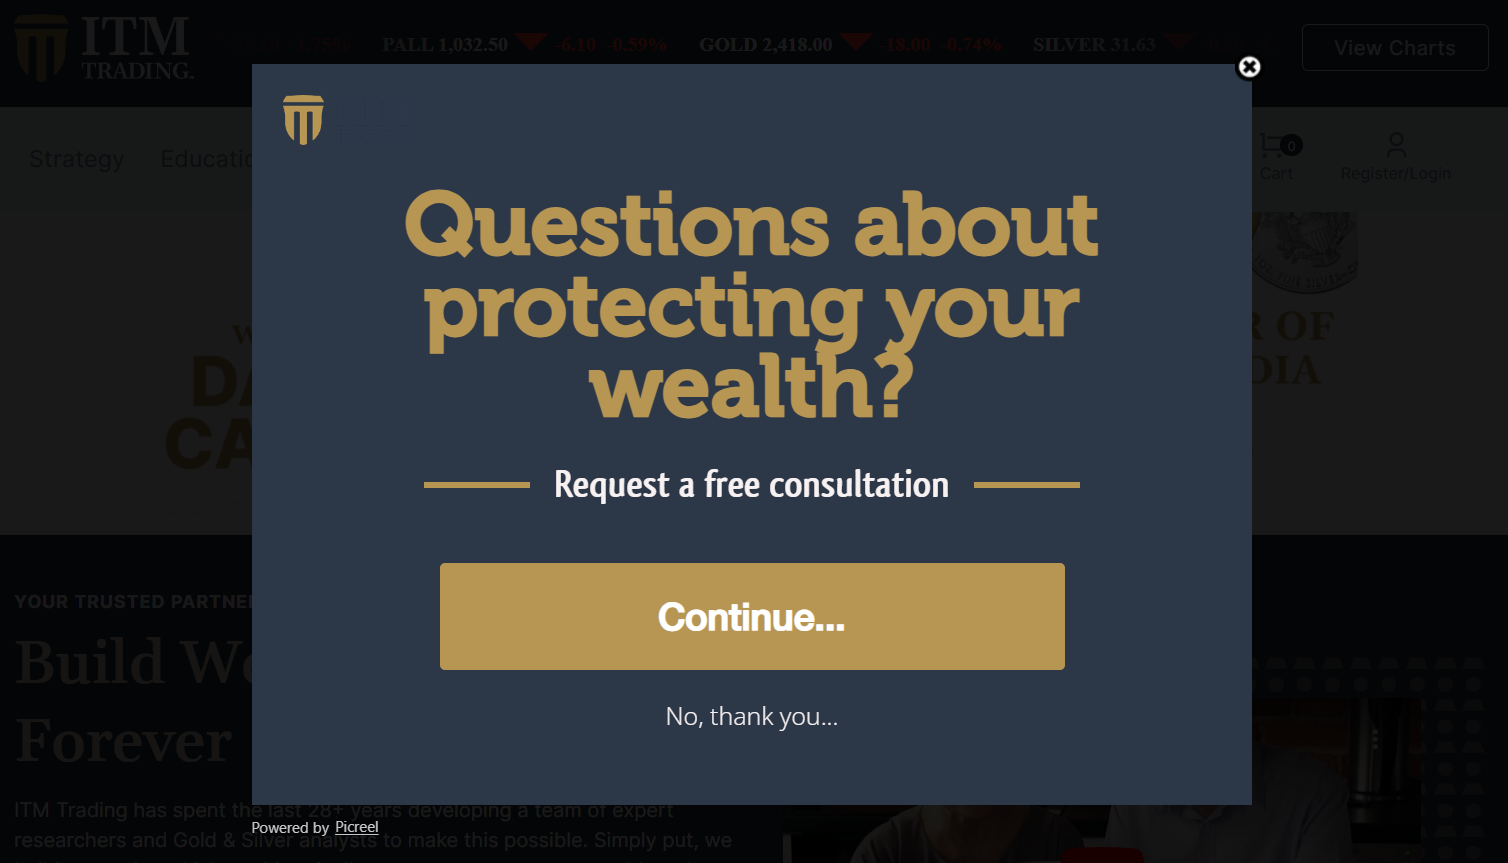 Free Consultation Popup - ITM Trading